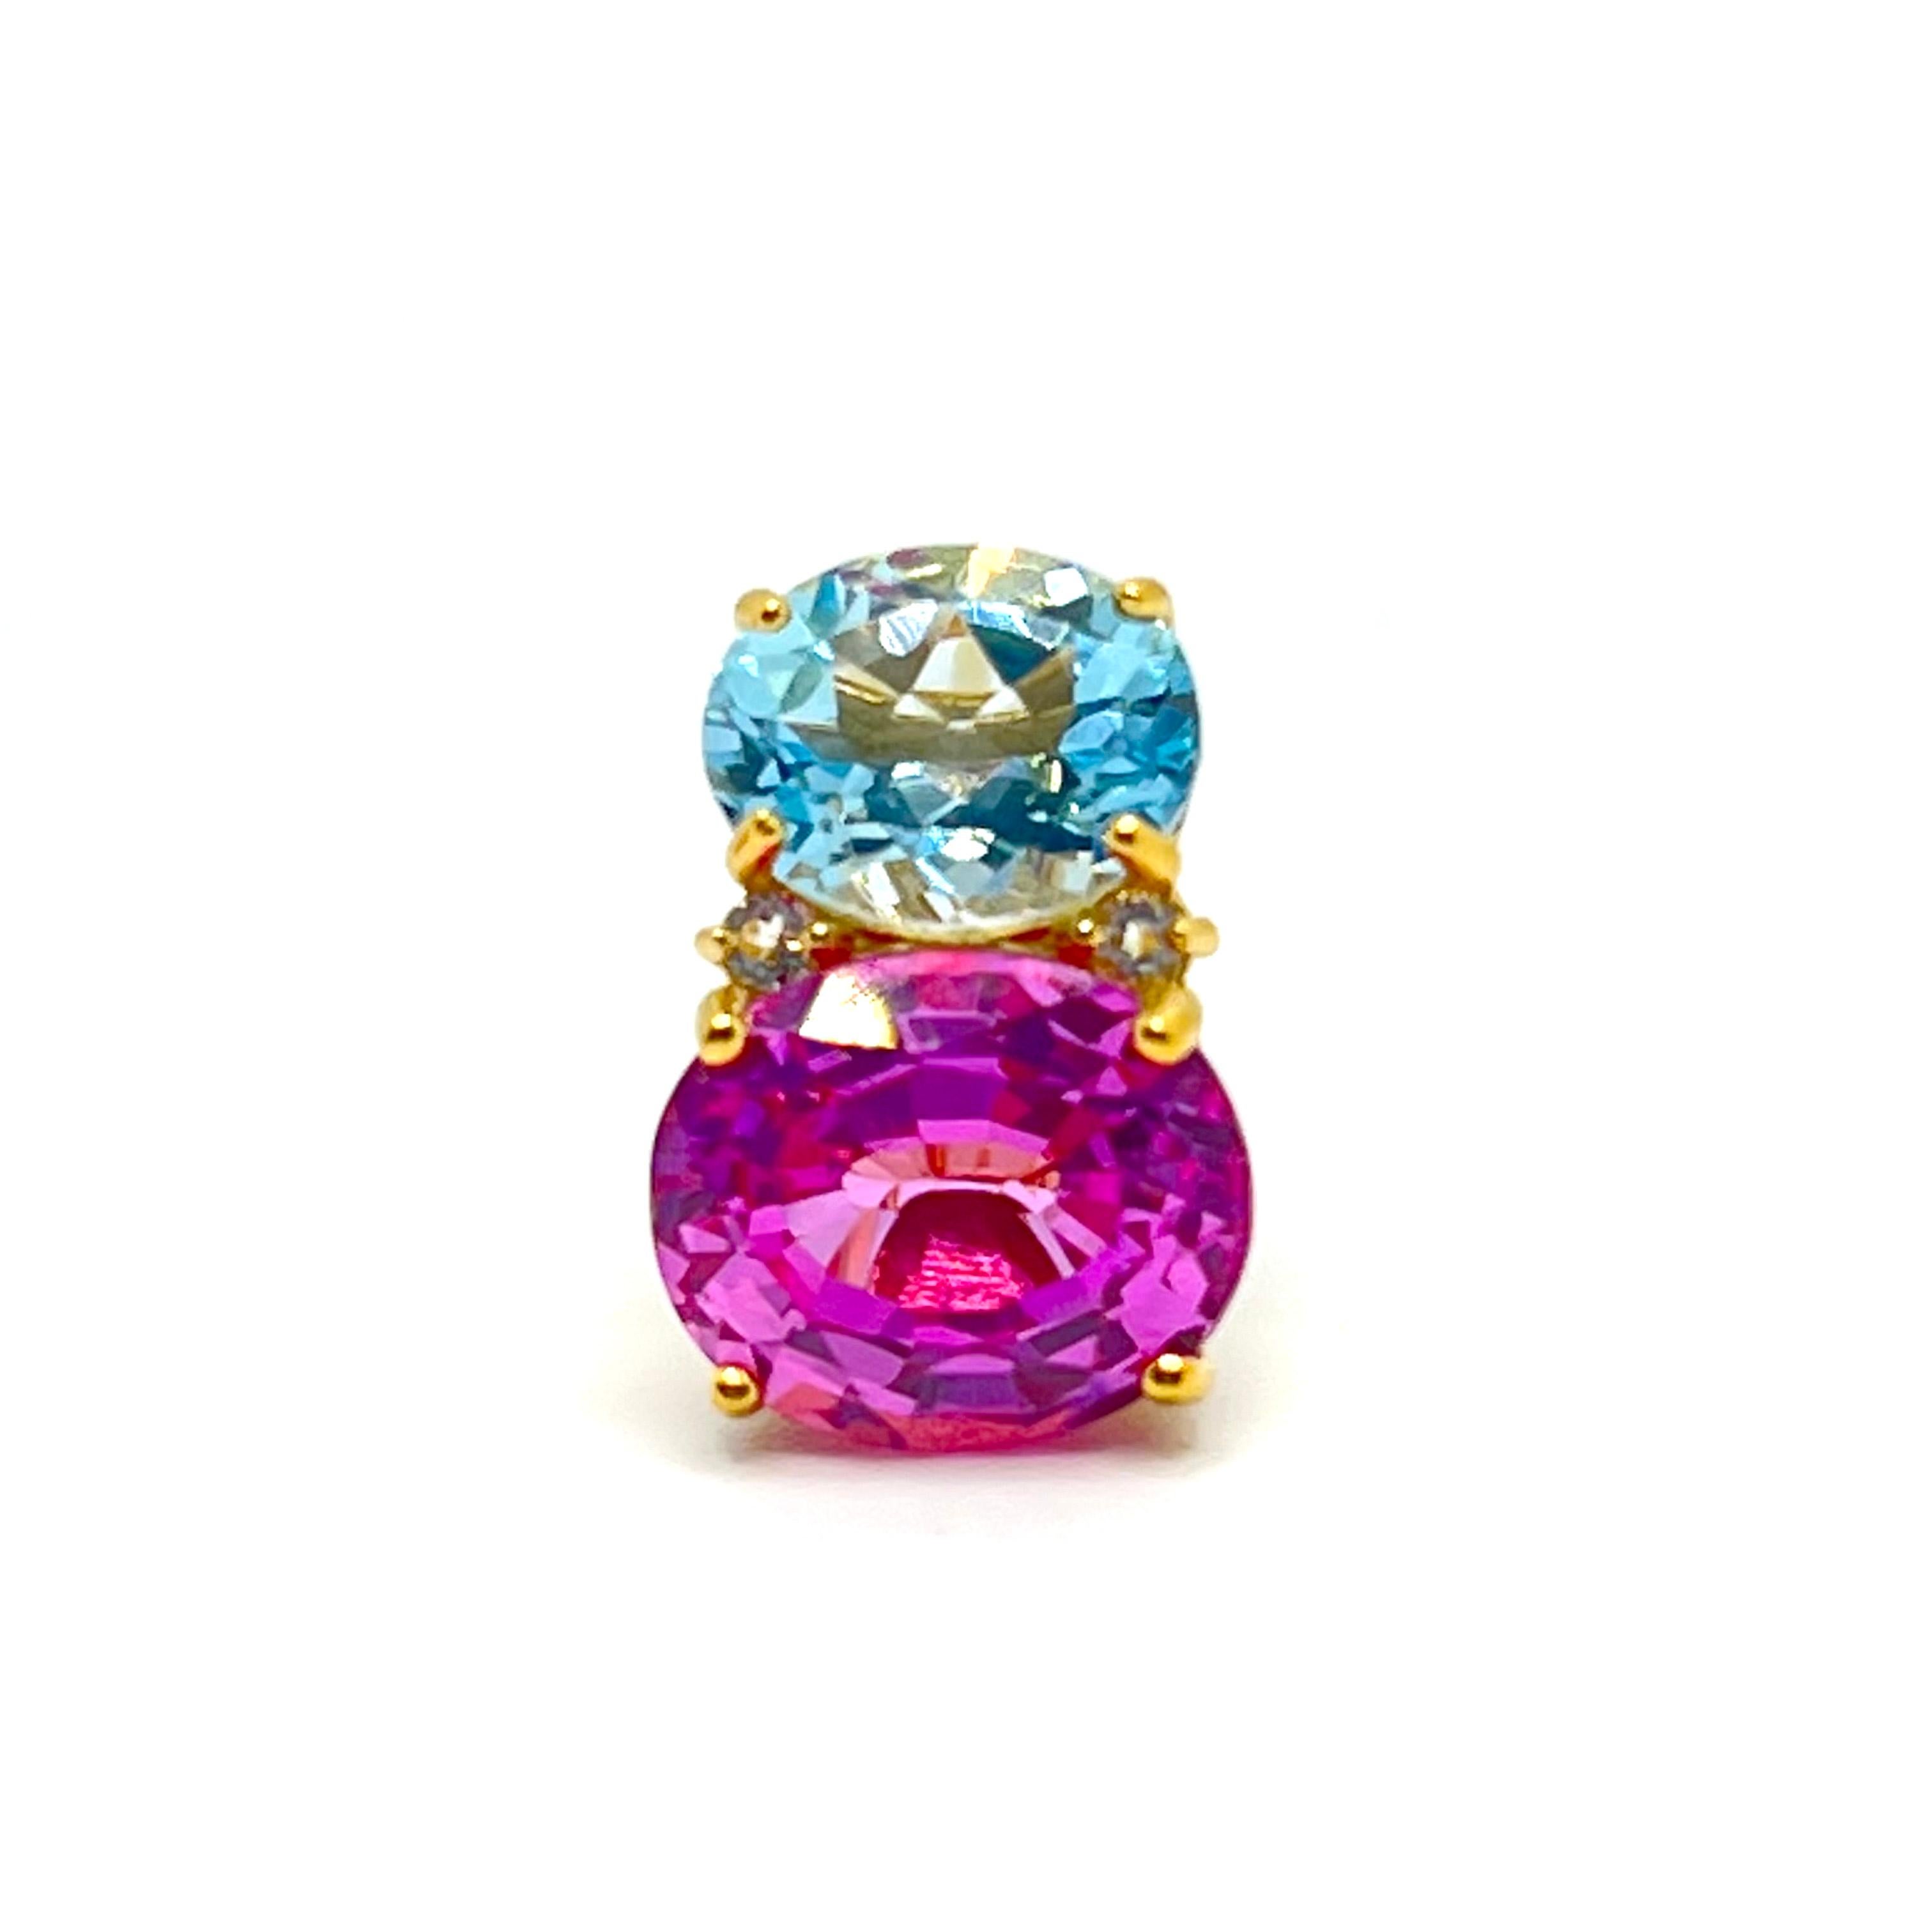 Oval Cut Stunning Double Oval Blue Topaz & Pink Sapphire Earrings For Sale